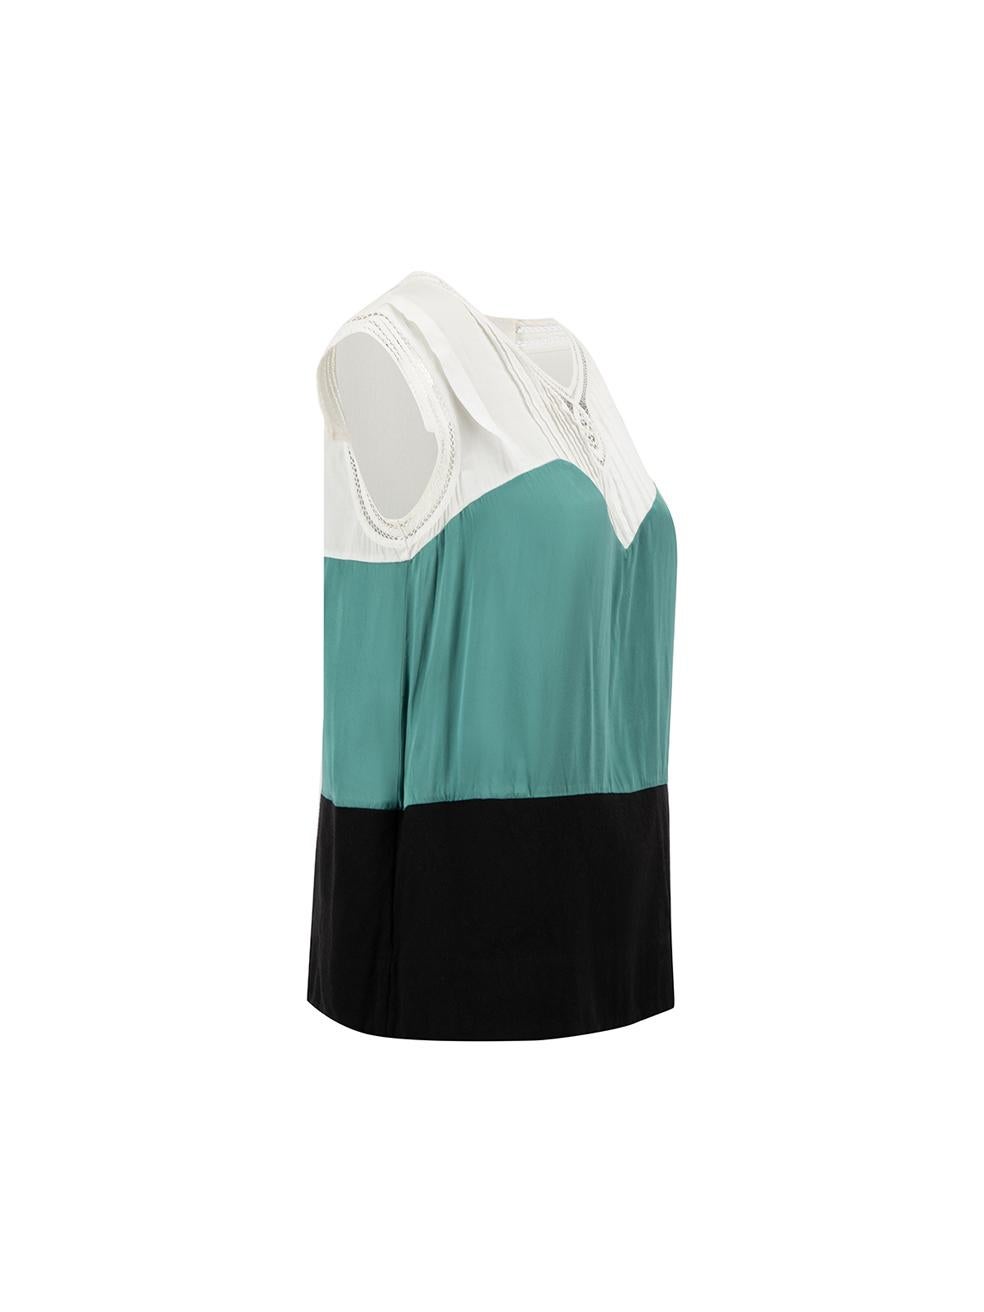 CONDITION is Very good. Hardly any visible wear to top is evident on this used See by Chloé designer resale item.



Details


Multicolour

Wool

Sleeveless top

Colour block detail

Lace accent

V neckline

Back zip closure with snap